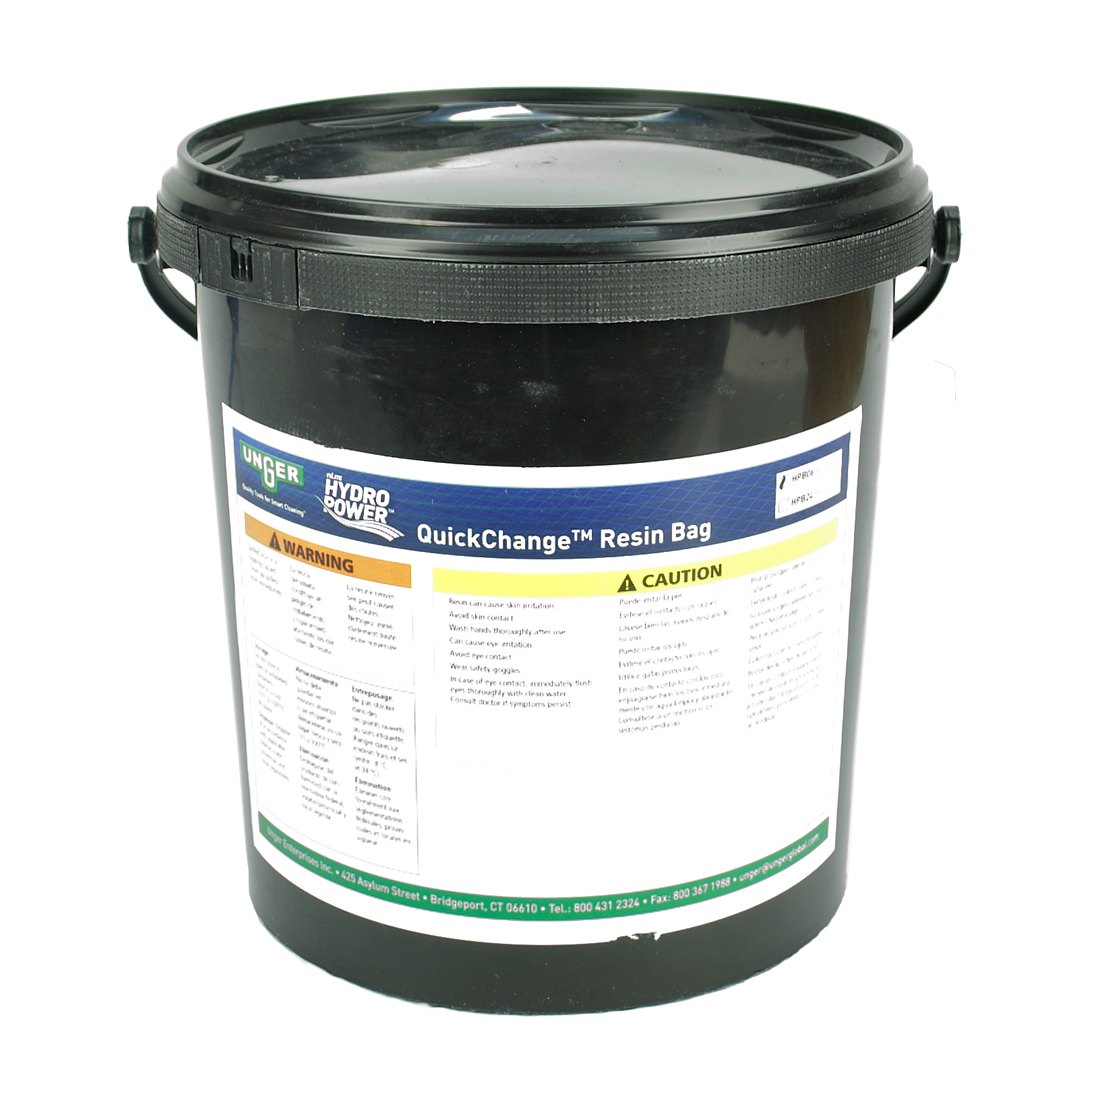 Unger HydroPower Resin Bag - Single Pail View